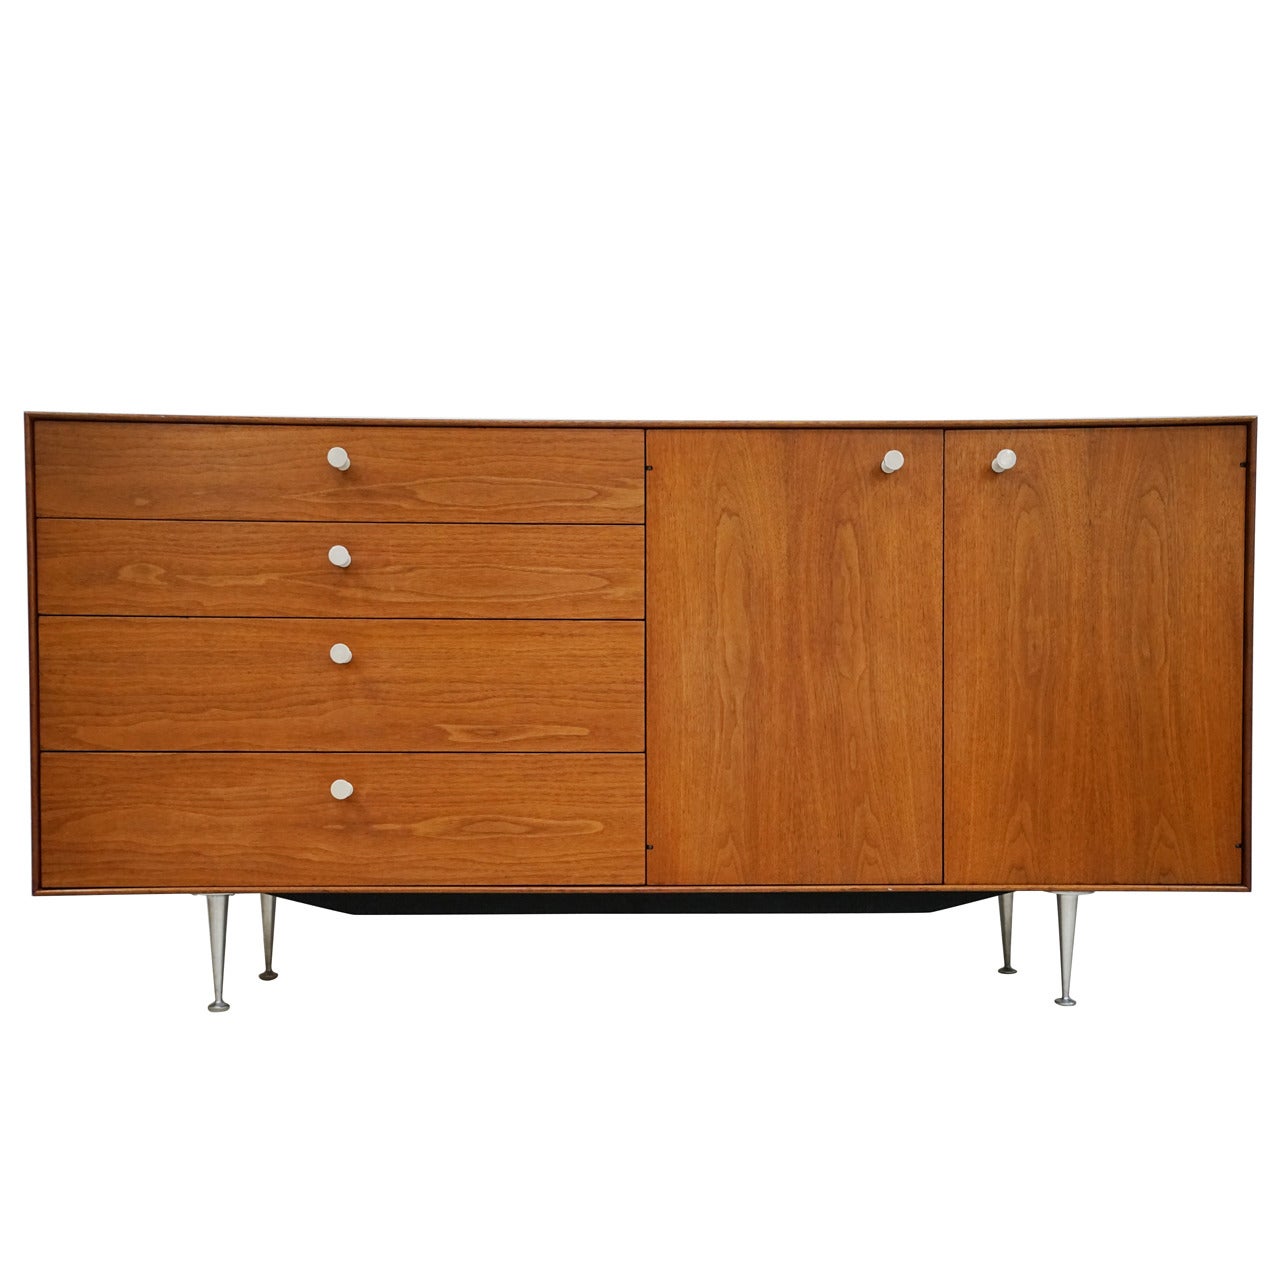 George Nelson Thin Edge Credenza for Herman Miller